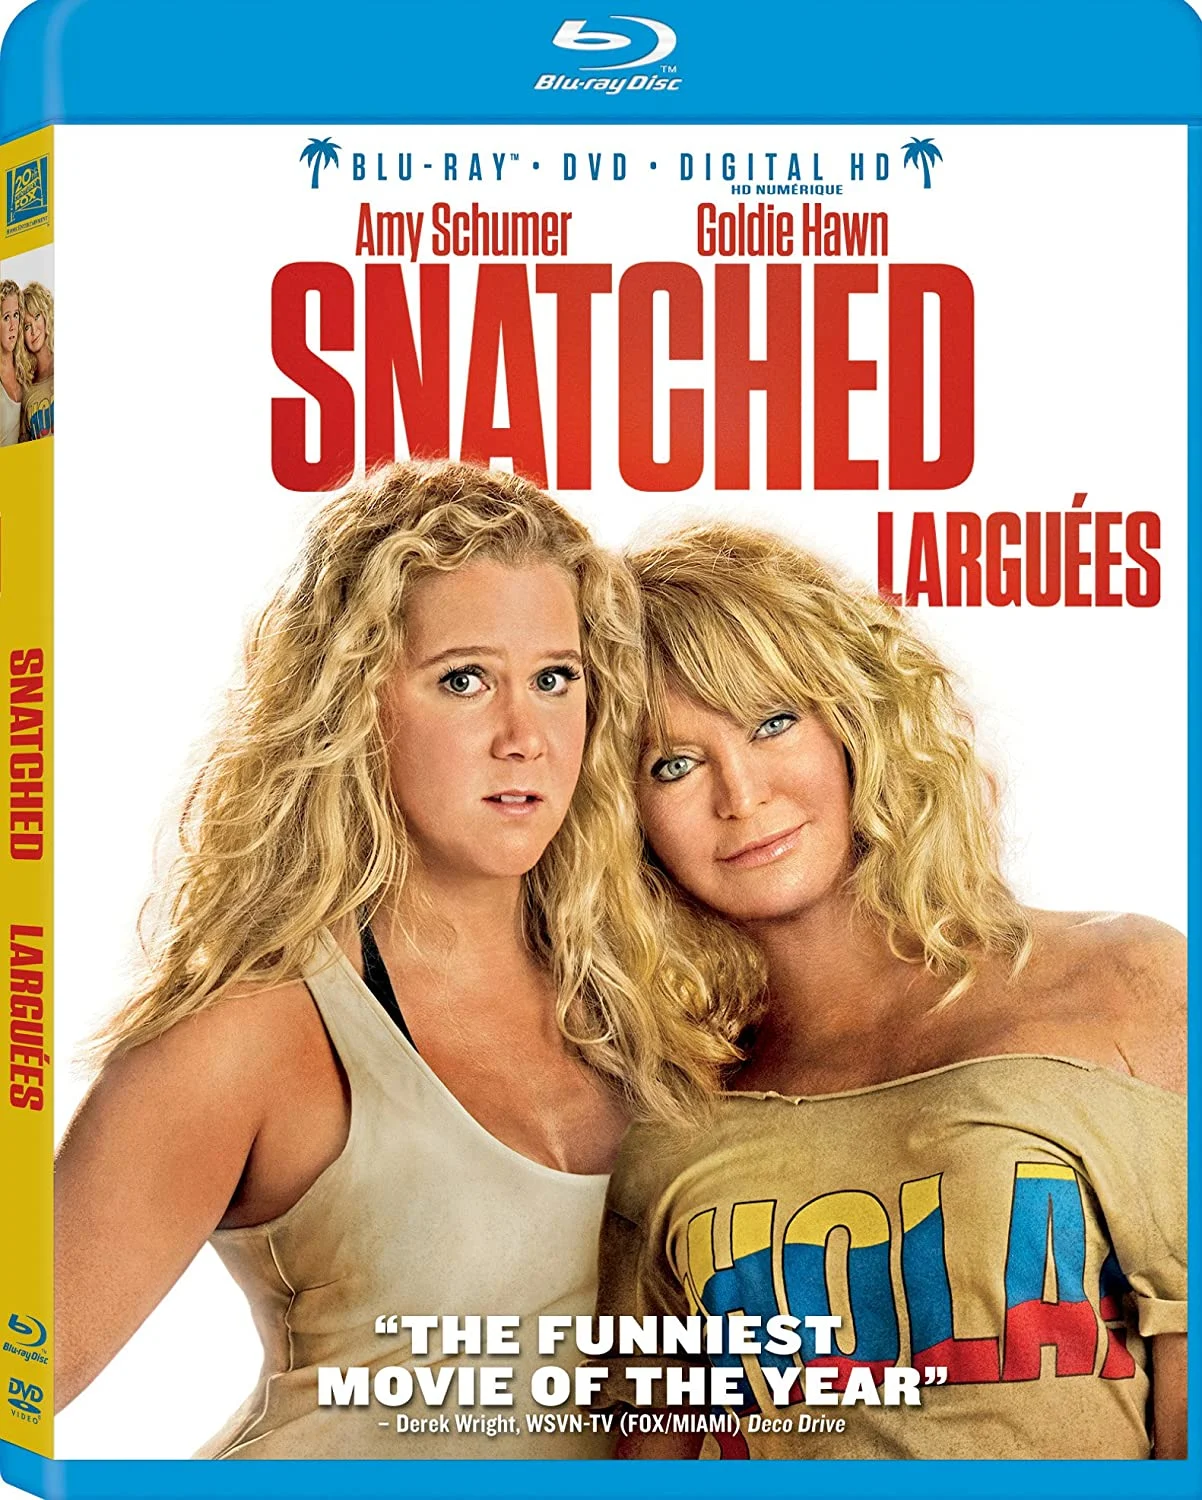 Snatched (Blu-ray/DVD Combo) on MovieShack